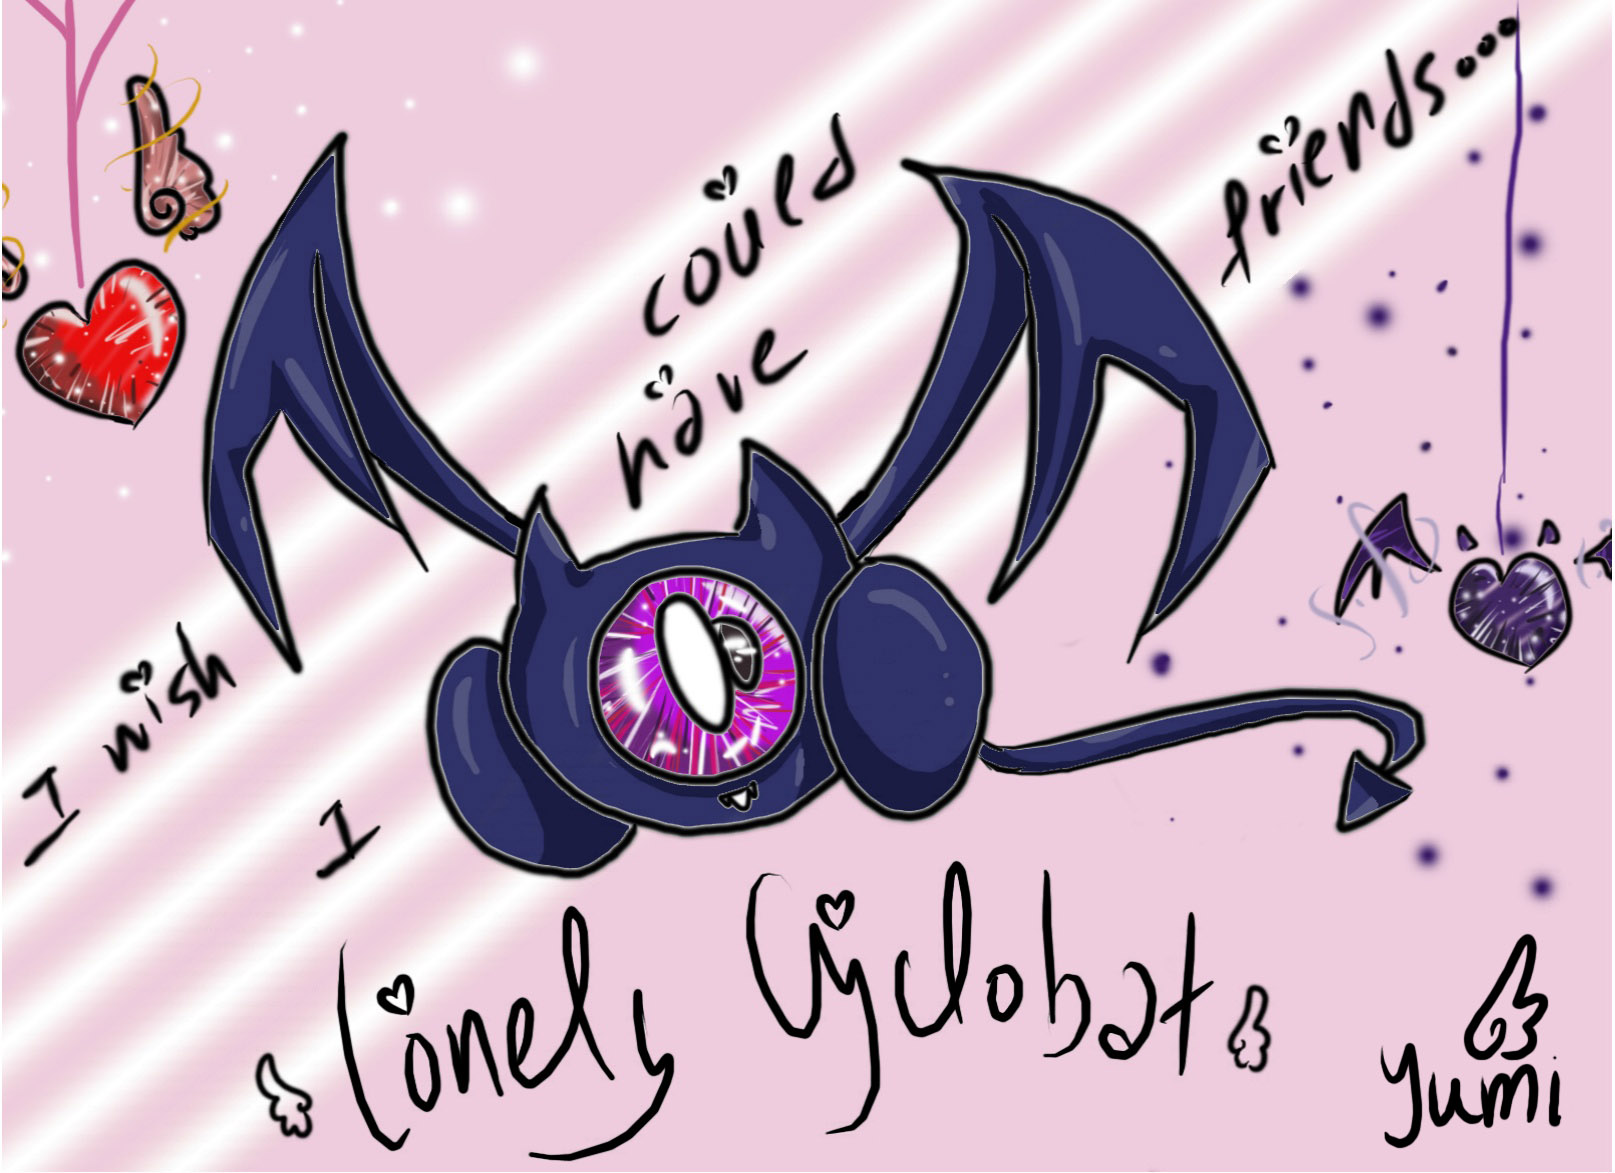 Lonely Cyclobat Cover Page by Yumiko_Ying_Vinnie